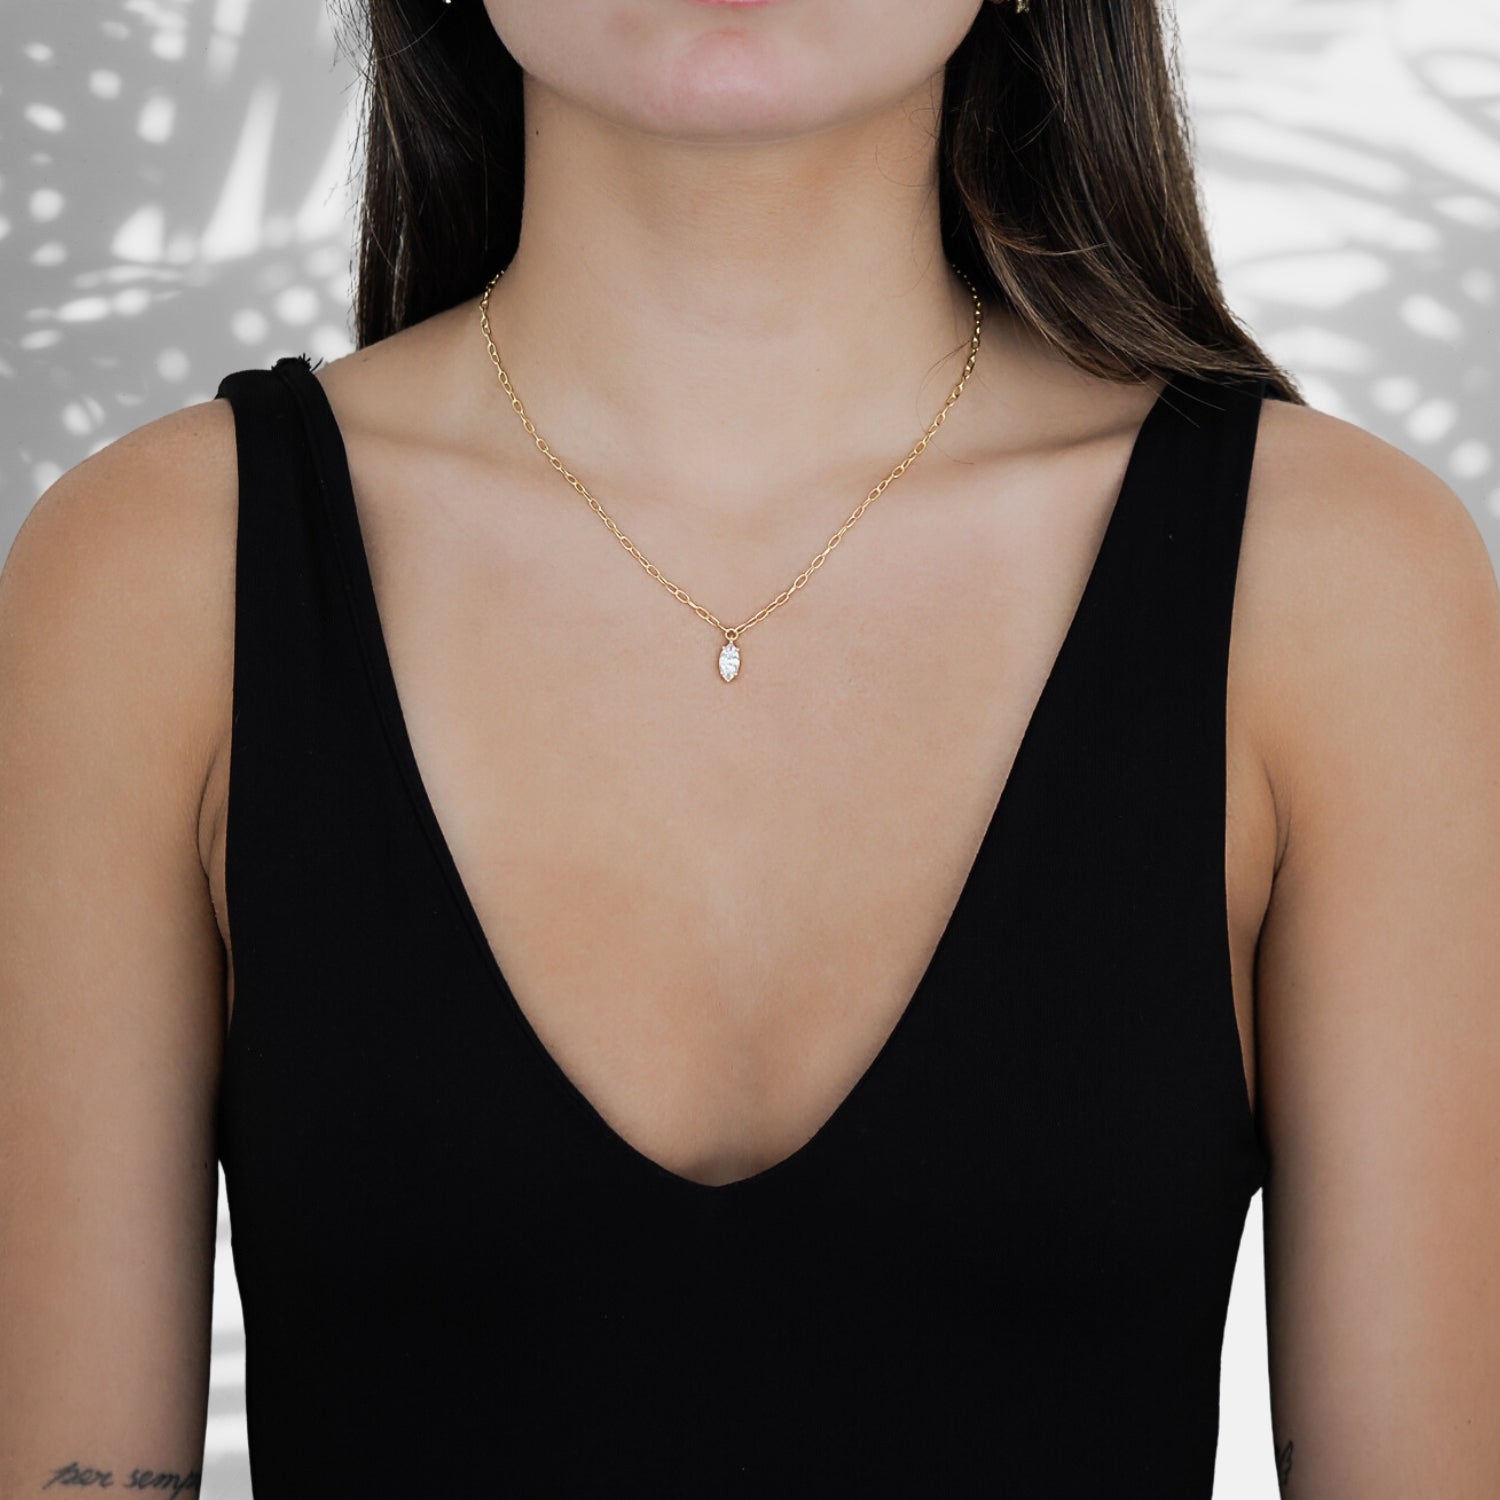 The Gold and Diamond Chain Necklace, a luxurious accessory that enhances the model&#39;s natural beauty and style.